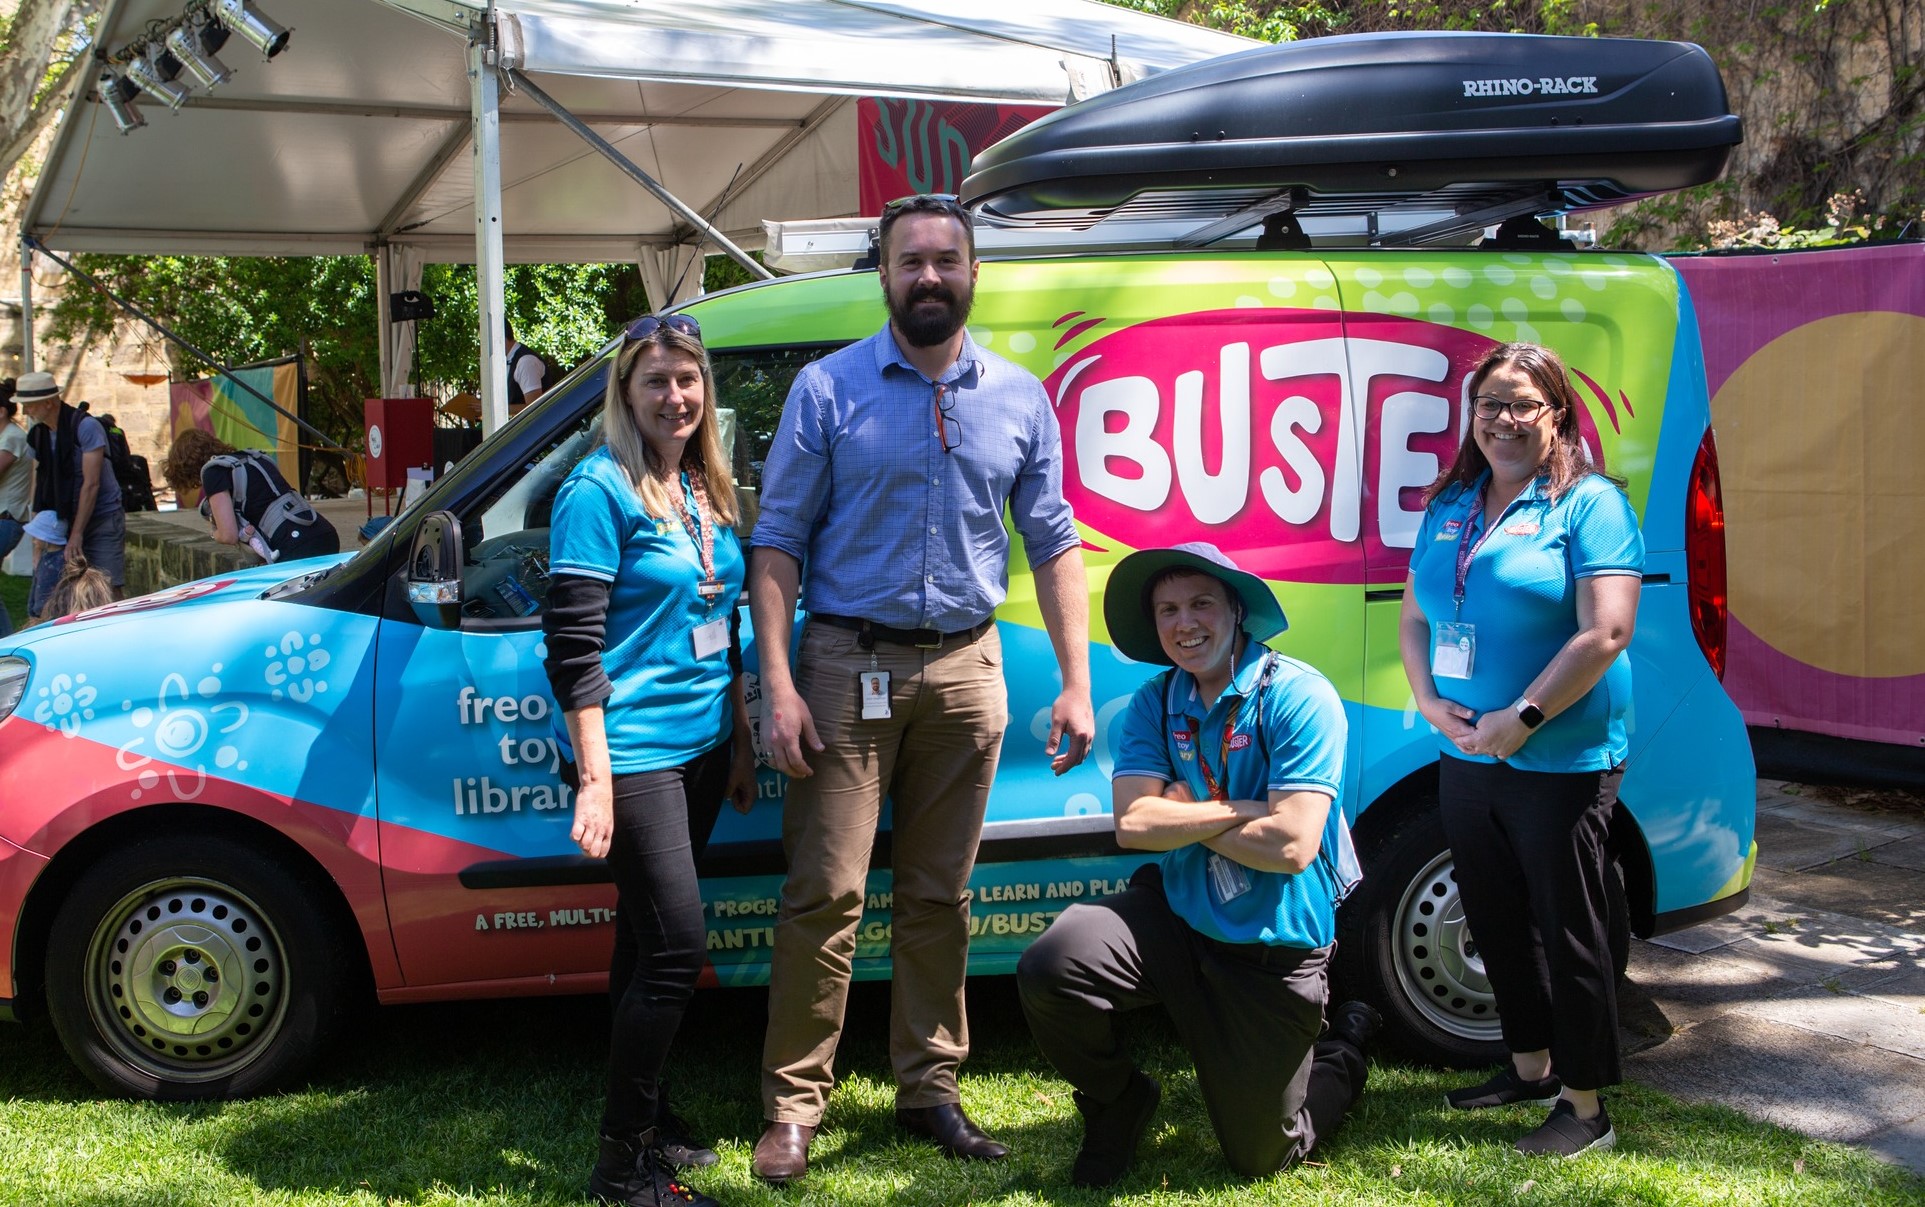 Four people standing in front of the Buster van.